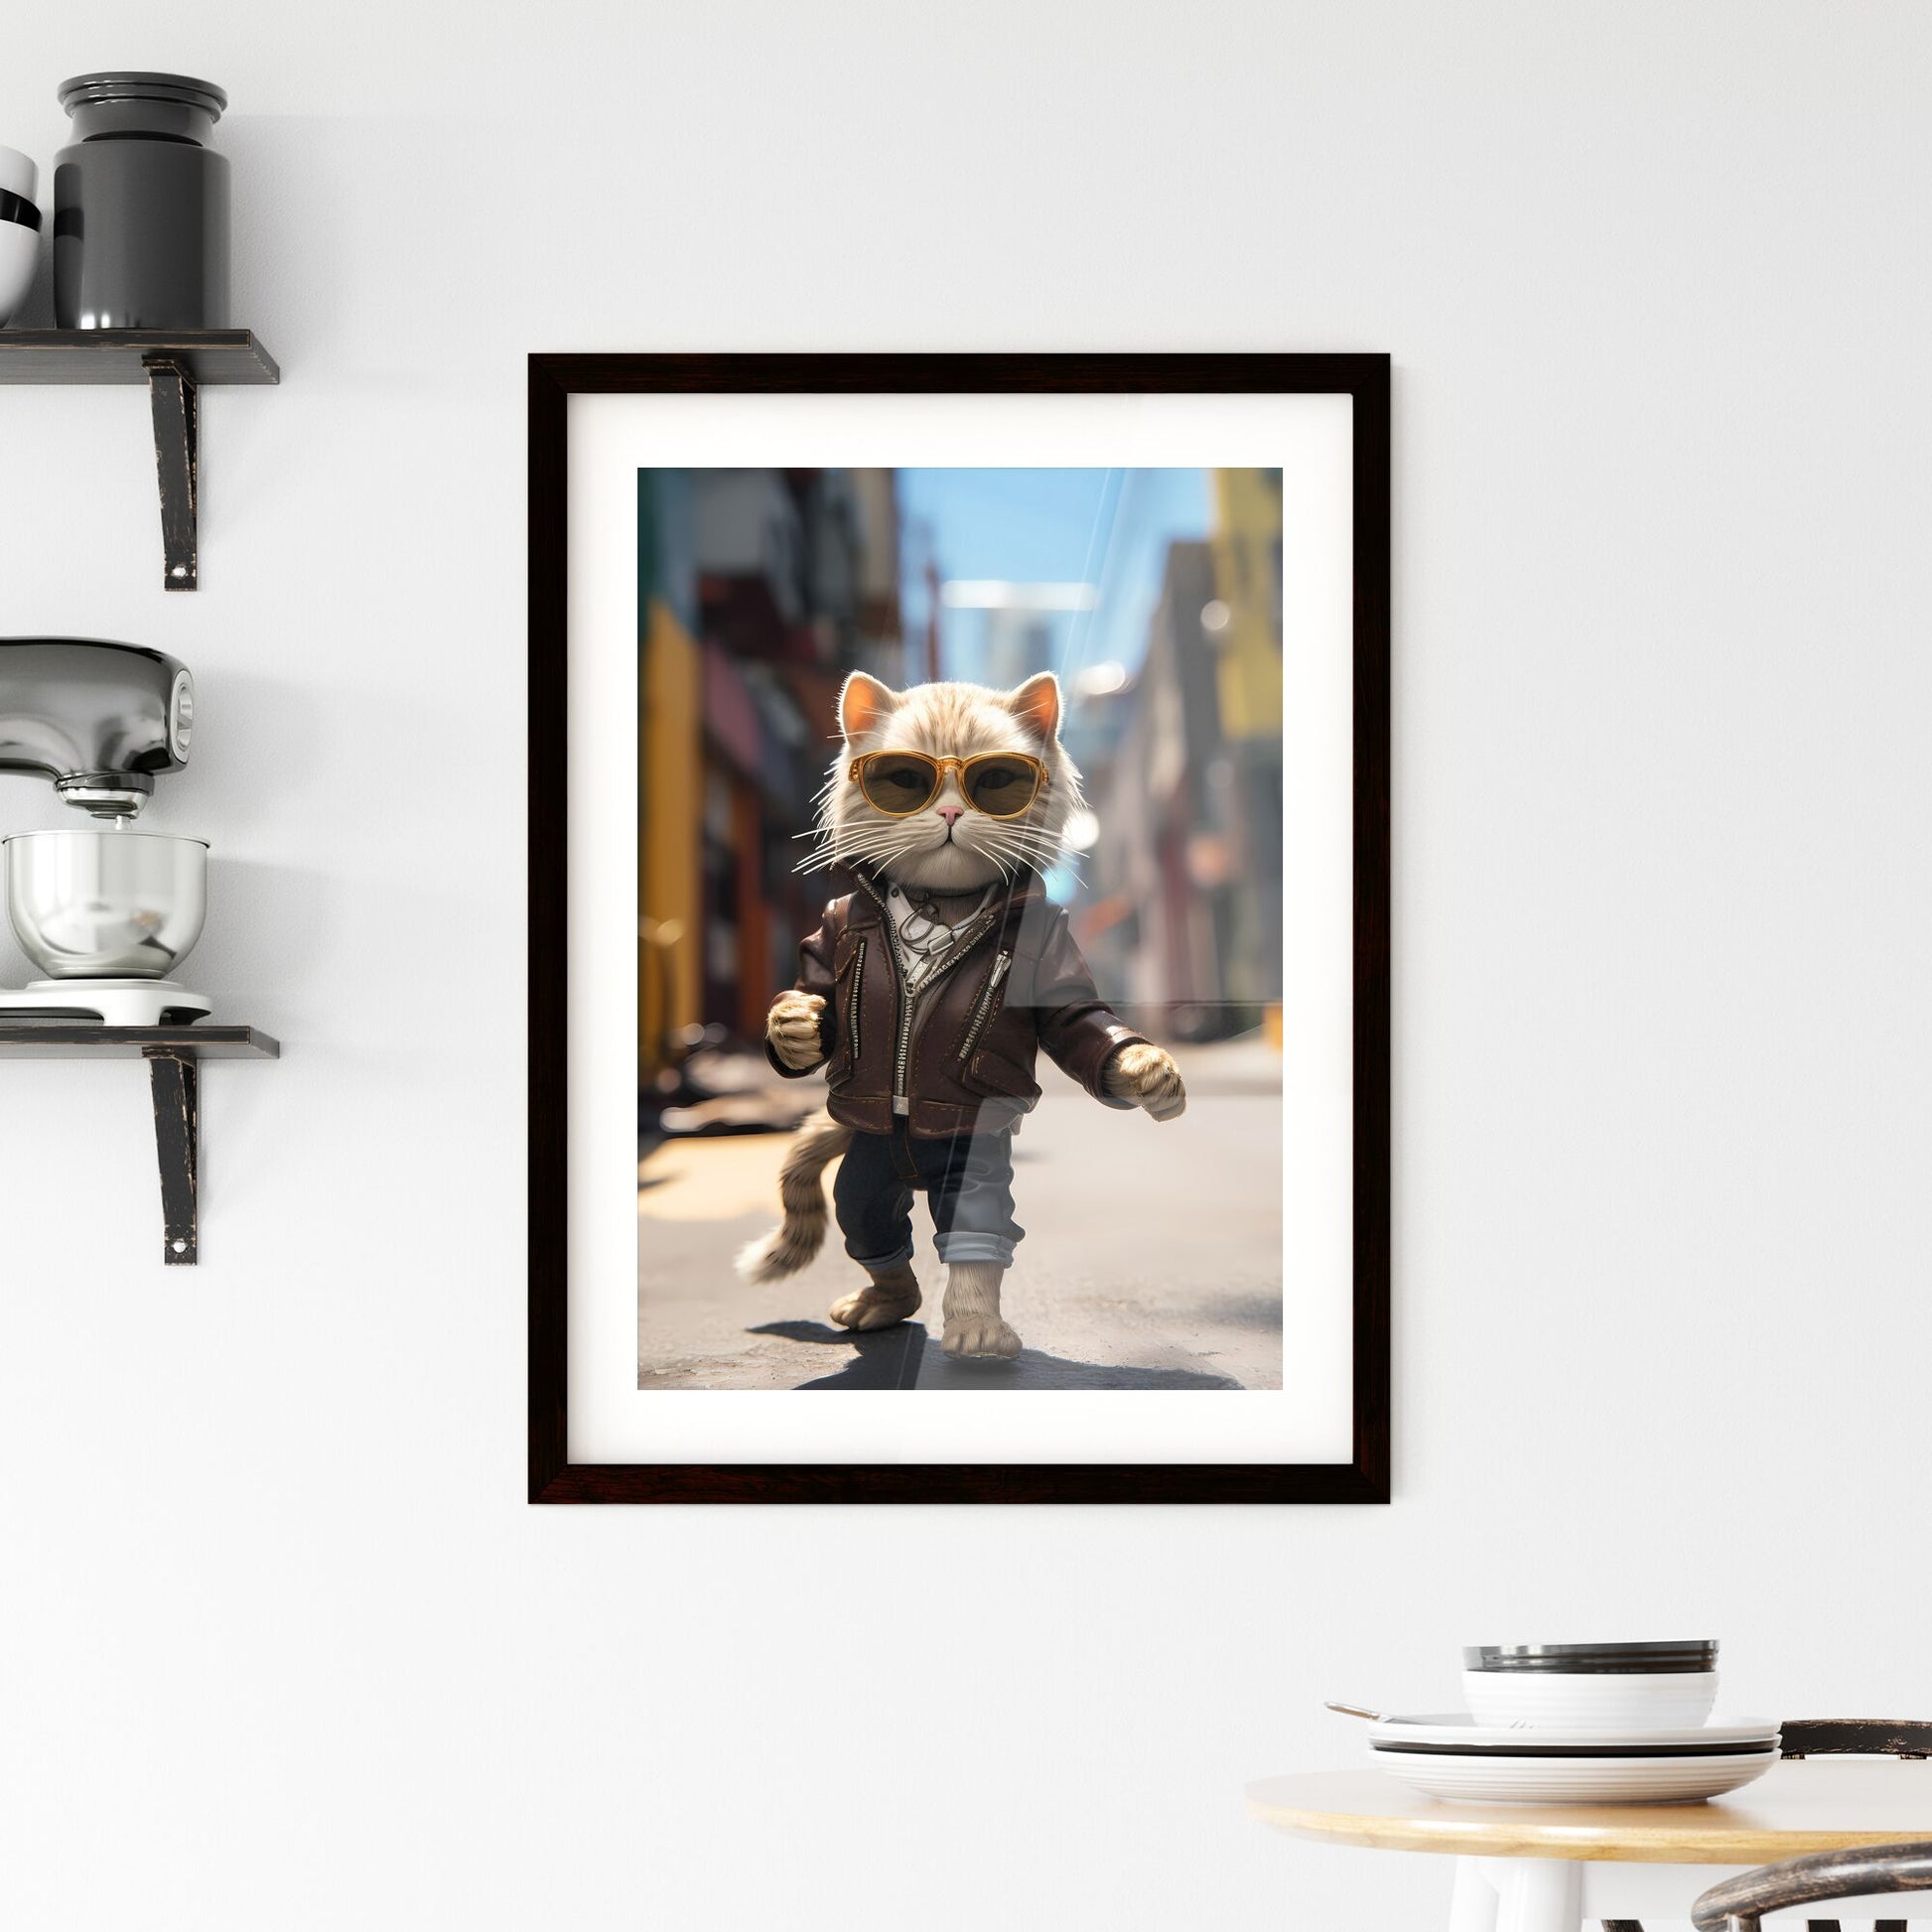 A Poster of A cat wearing sunglasses - A Cat Wearing Sunglasses And A Leather Jacket Walking On A Street Default Title